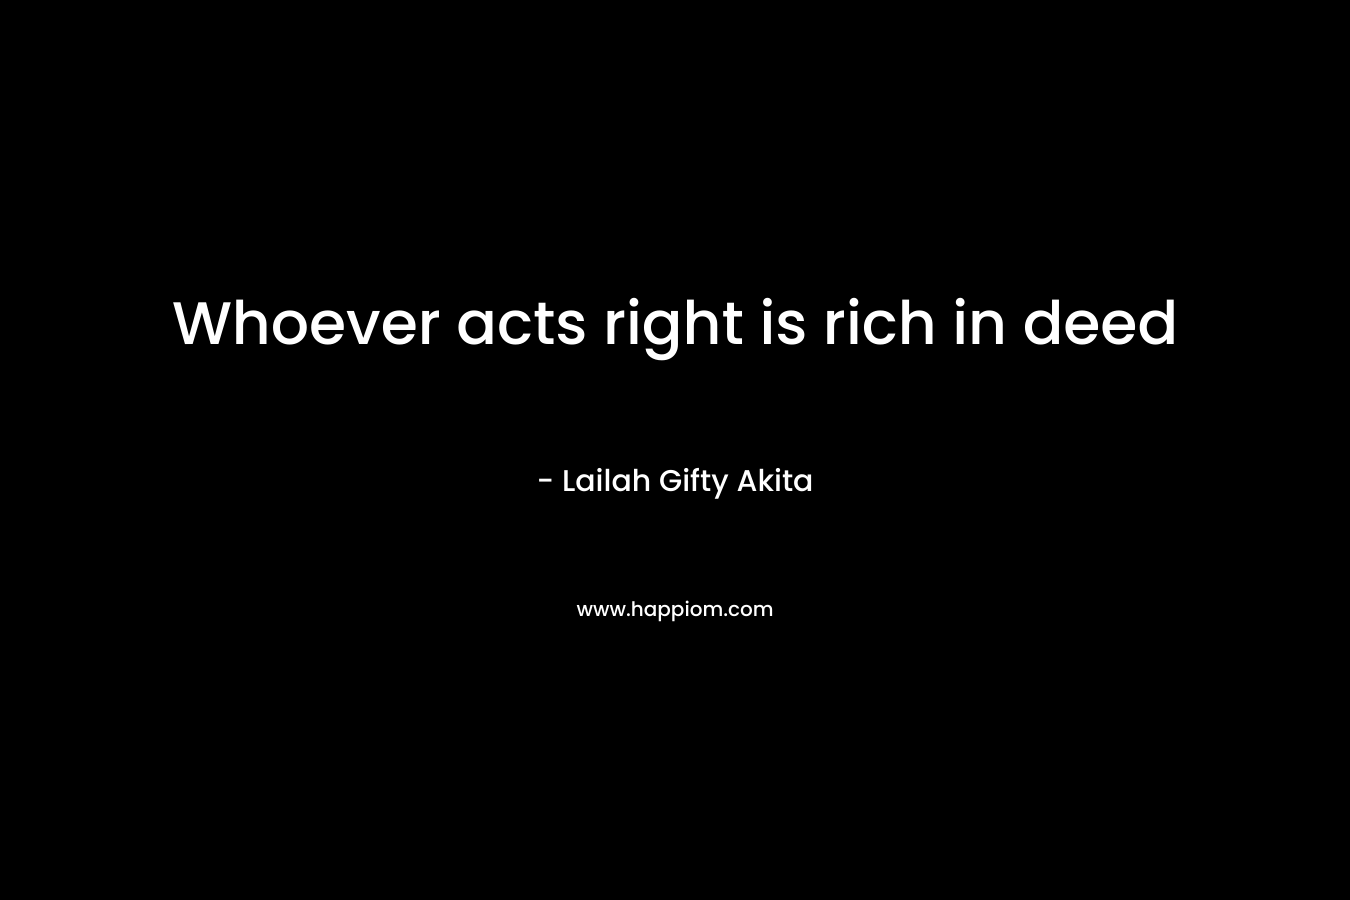 Whoever acts right is rich in deed